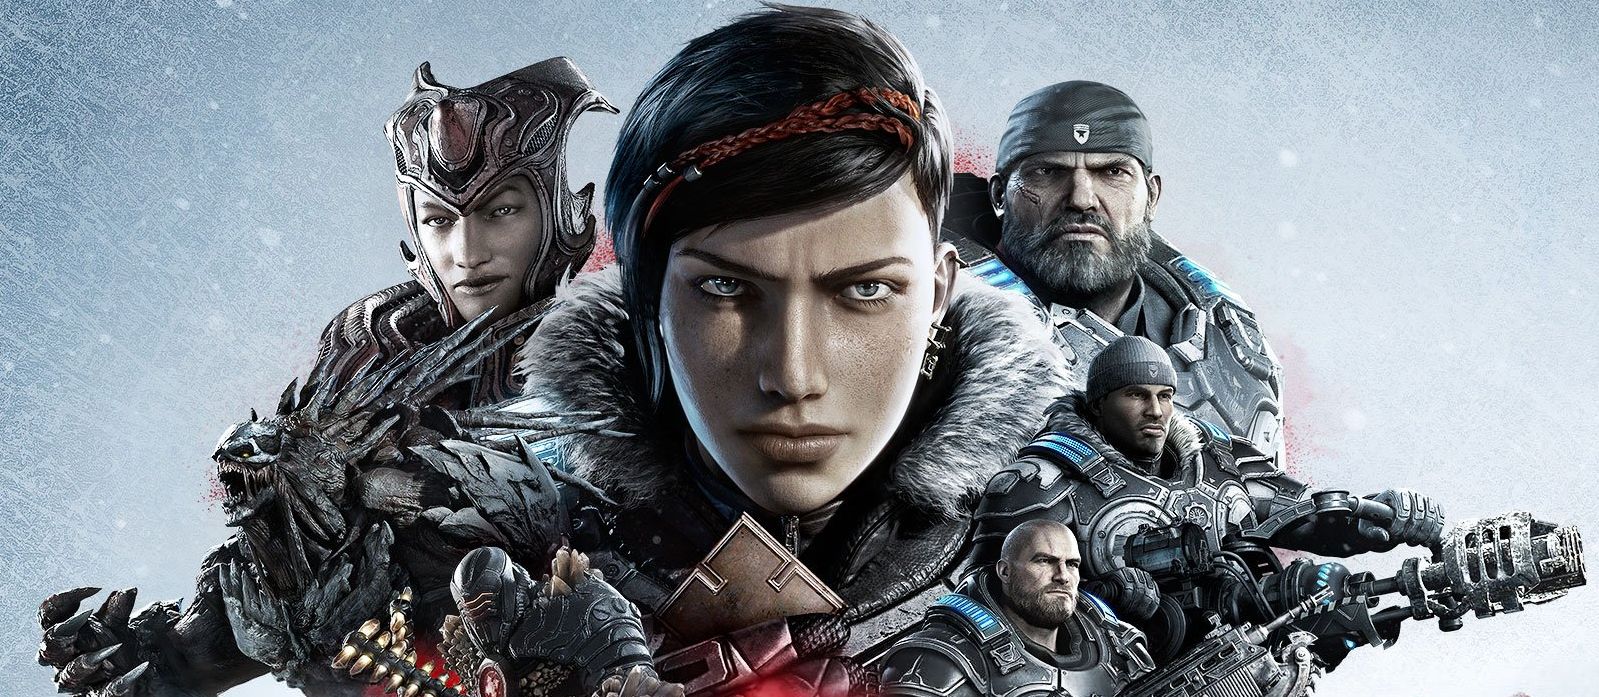 Image for Gears 5: game pass, gameplay, multiplayer modes and more